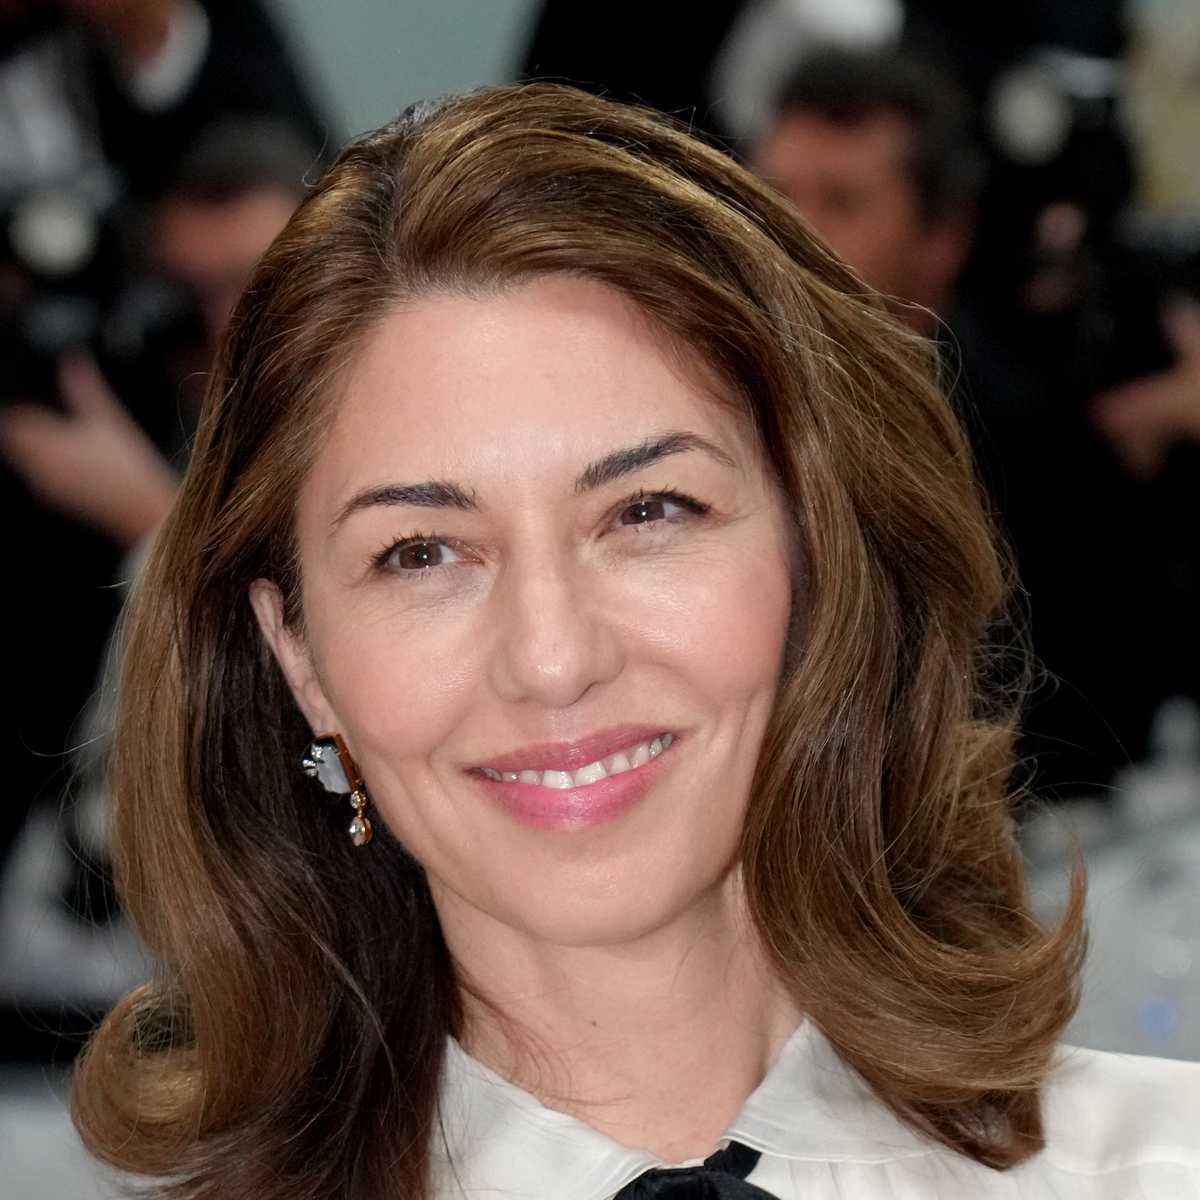 Sofia Coppola's Kids: Everything To Know About Her 2 Daughters